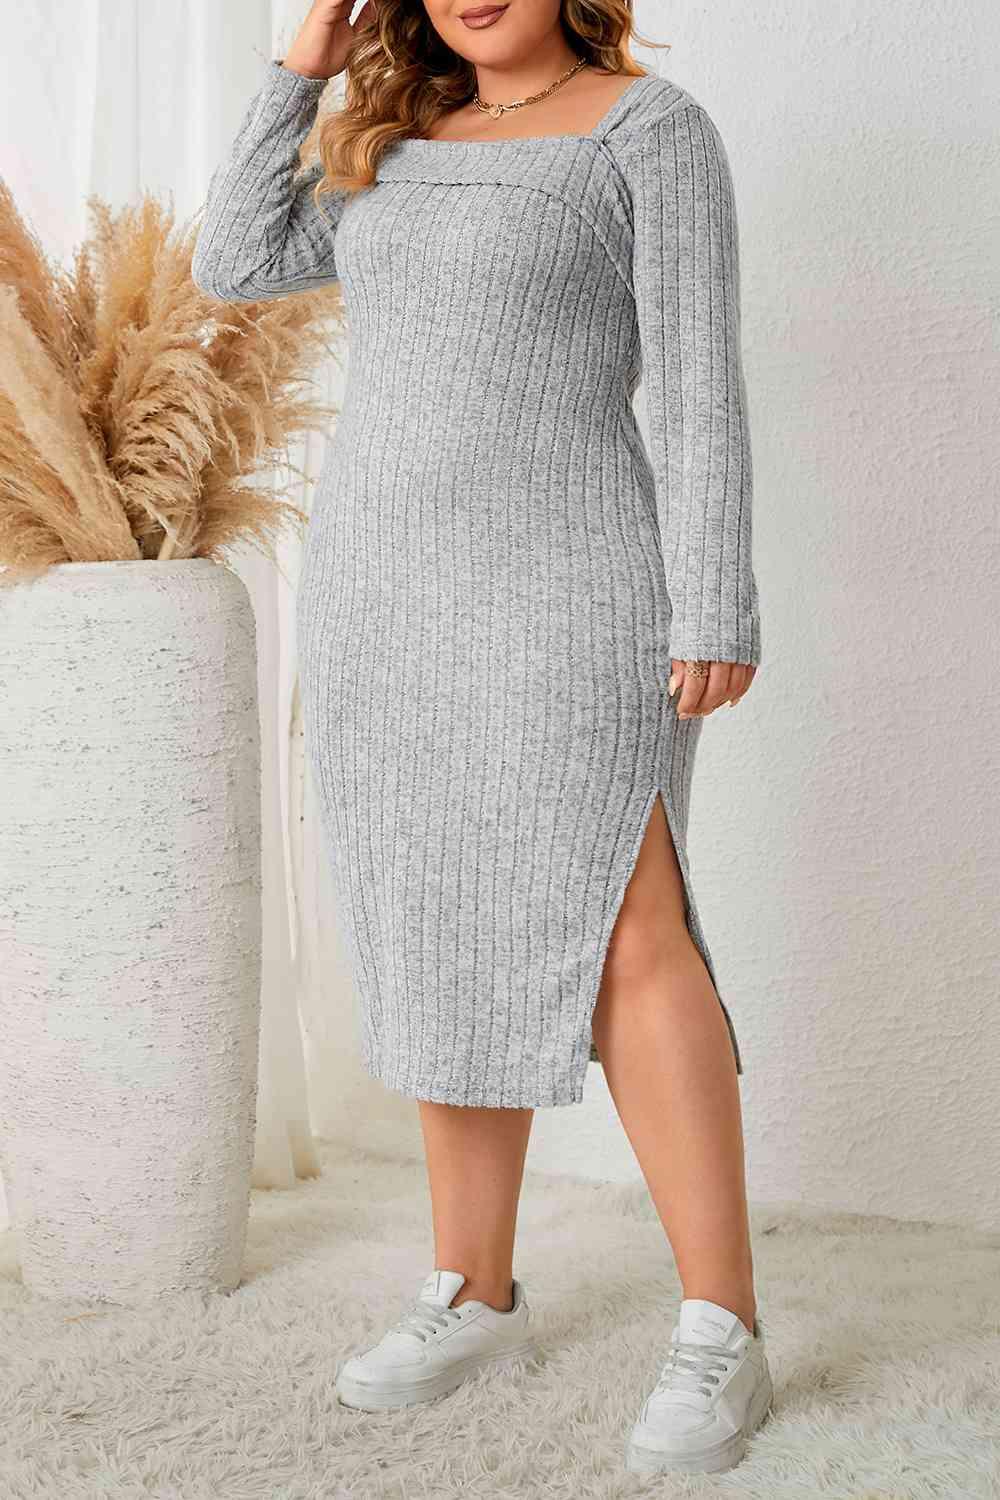 a woman wearing a grey sweater dress and sneakers